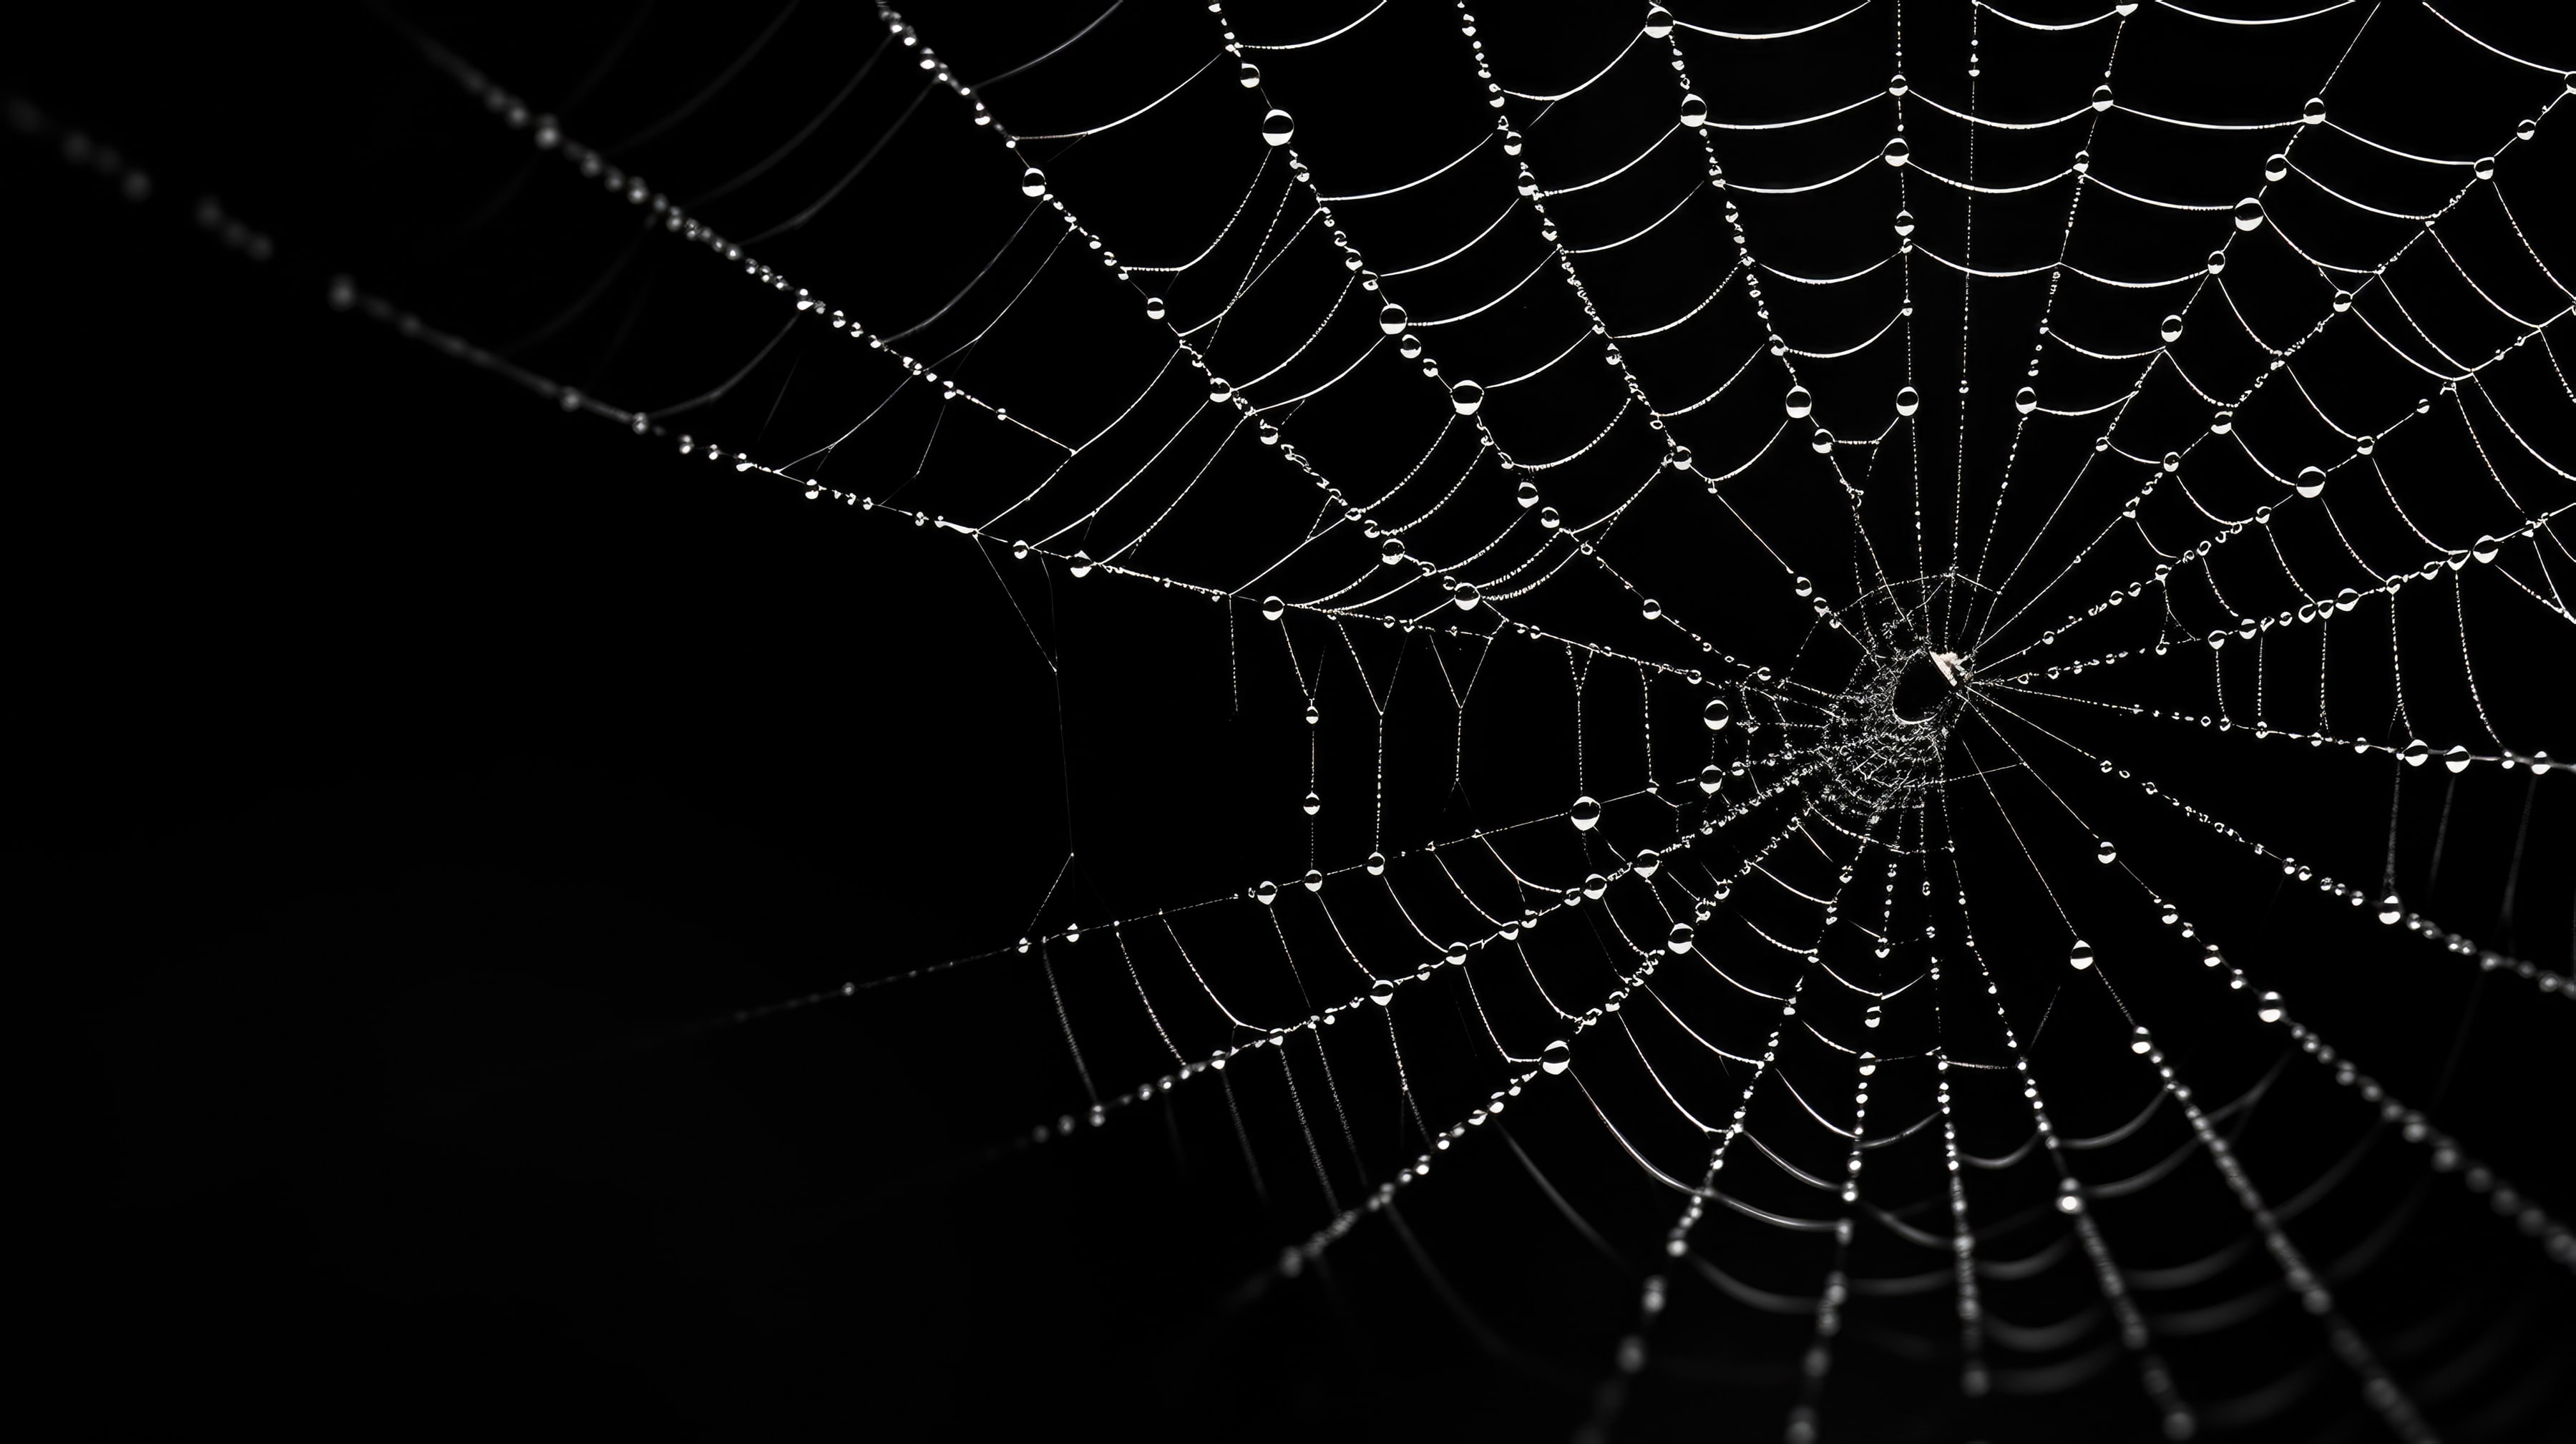 A spiders web silhouetted against a black background. There are water droplets caught in the web.